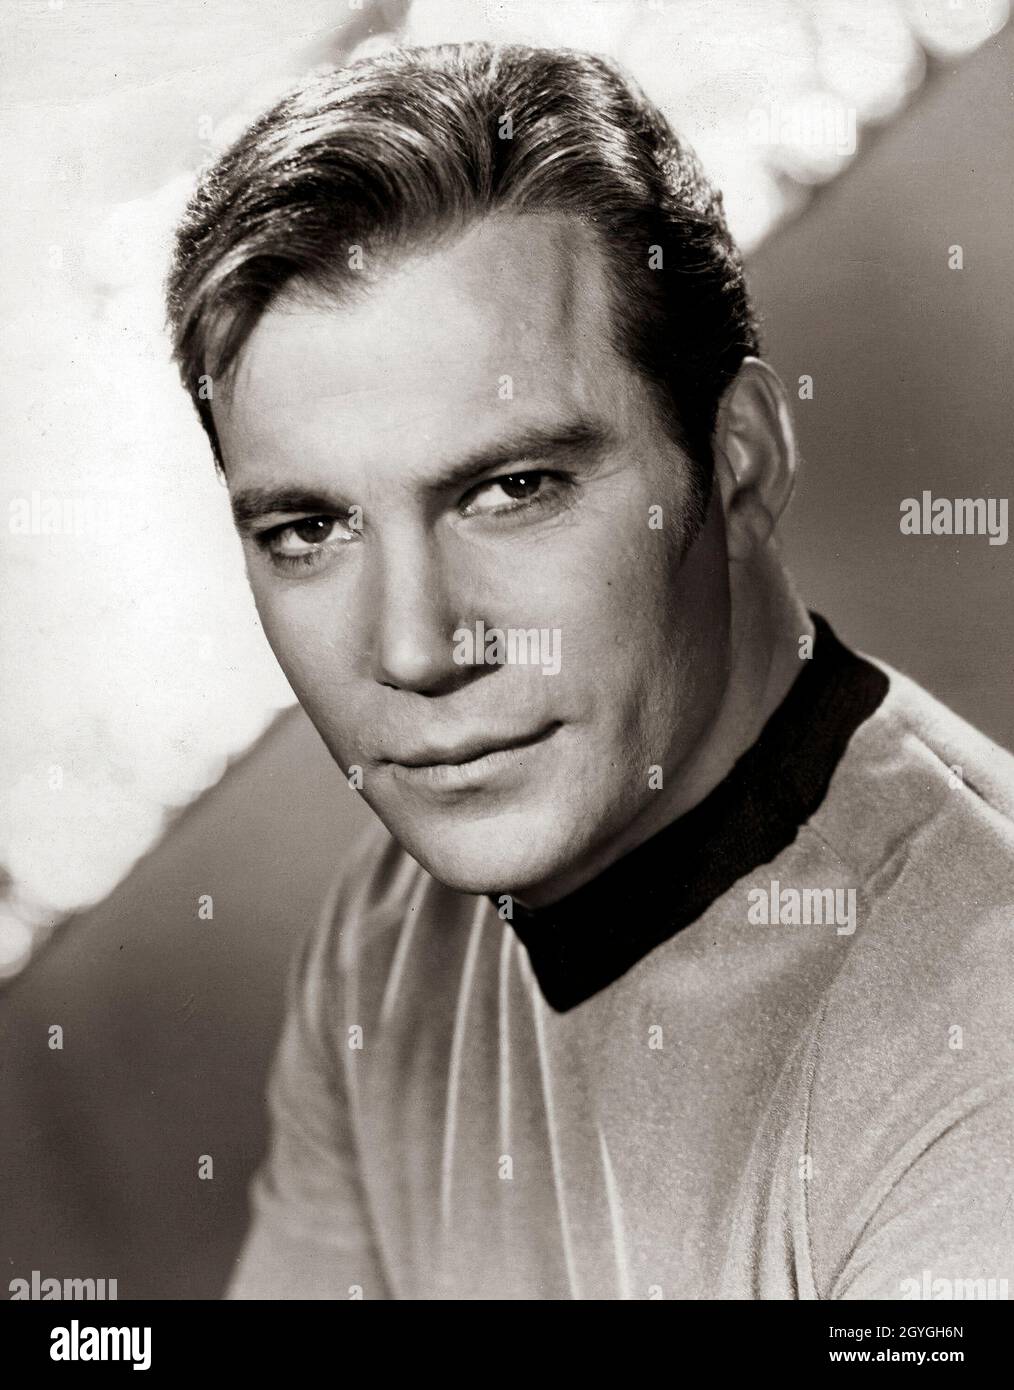 William Shatner as Star Trek's Captain Kirk. William Shatner OC (born March 22, 1931) is a Canadian actor, author, producer, director, screenwriter, and singer. In his seven decades of acting, he became a cultural icon for his portrayal of Captain James T. Kirk of the USS Enterprise in the Star Trek franchise. He has written a series of books chronicling his experiences playing Captain Kirk, being a part of Star Trek, and life after Star Trek. Stock Photo